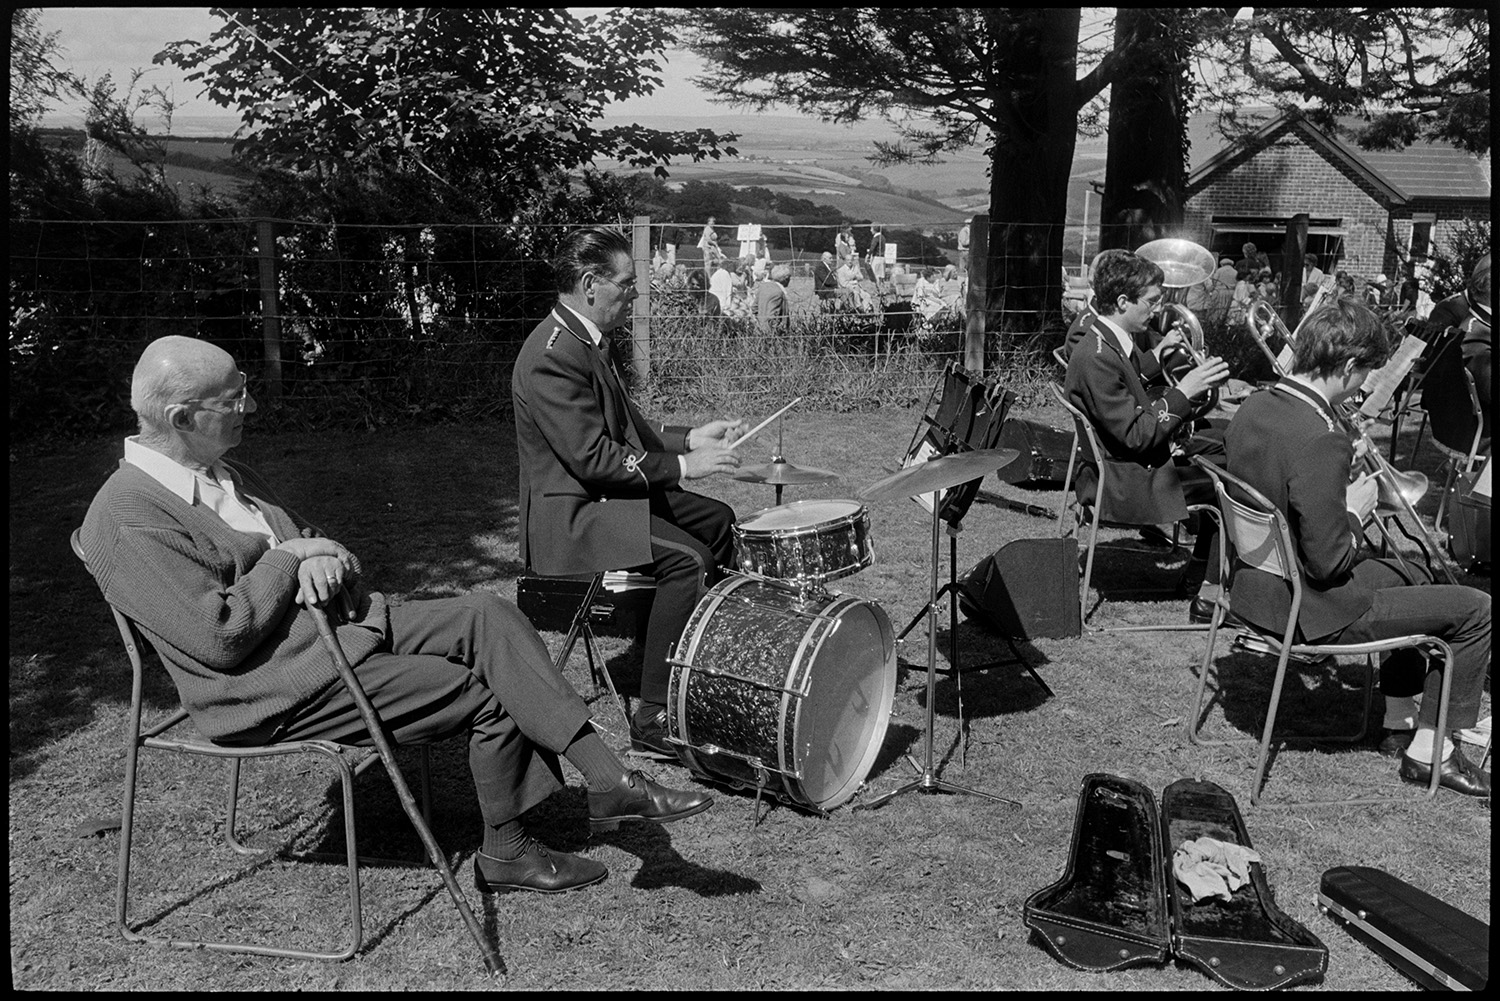 Fete, spectators, Brass Band, sideshows, games, pony rides. 
[A man sat on a chair listening to a band at Atherington church fete. He is sat by a man playing a drum kit.  They are playing in a field by a tree. People looking at stalls in the vicarage garden can be seen in the background.]